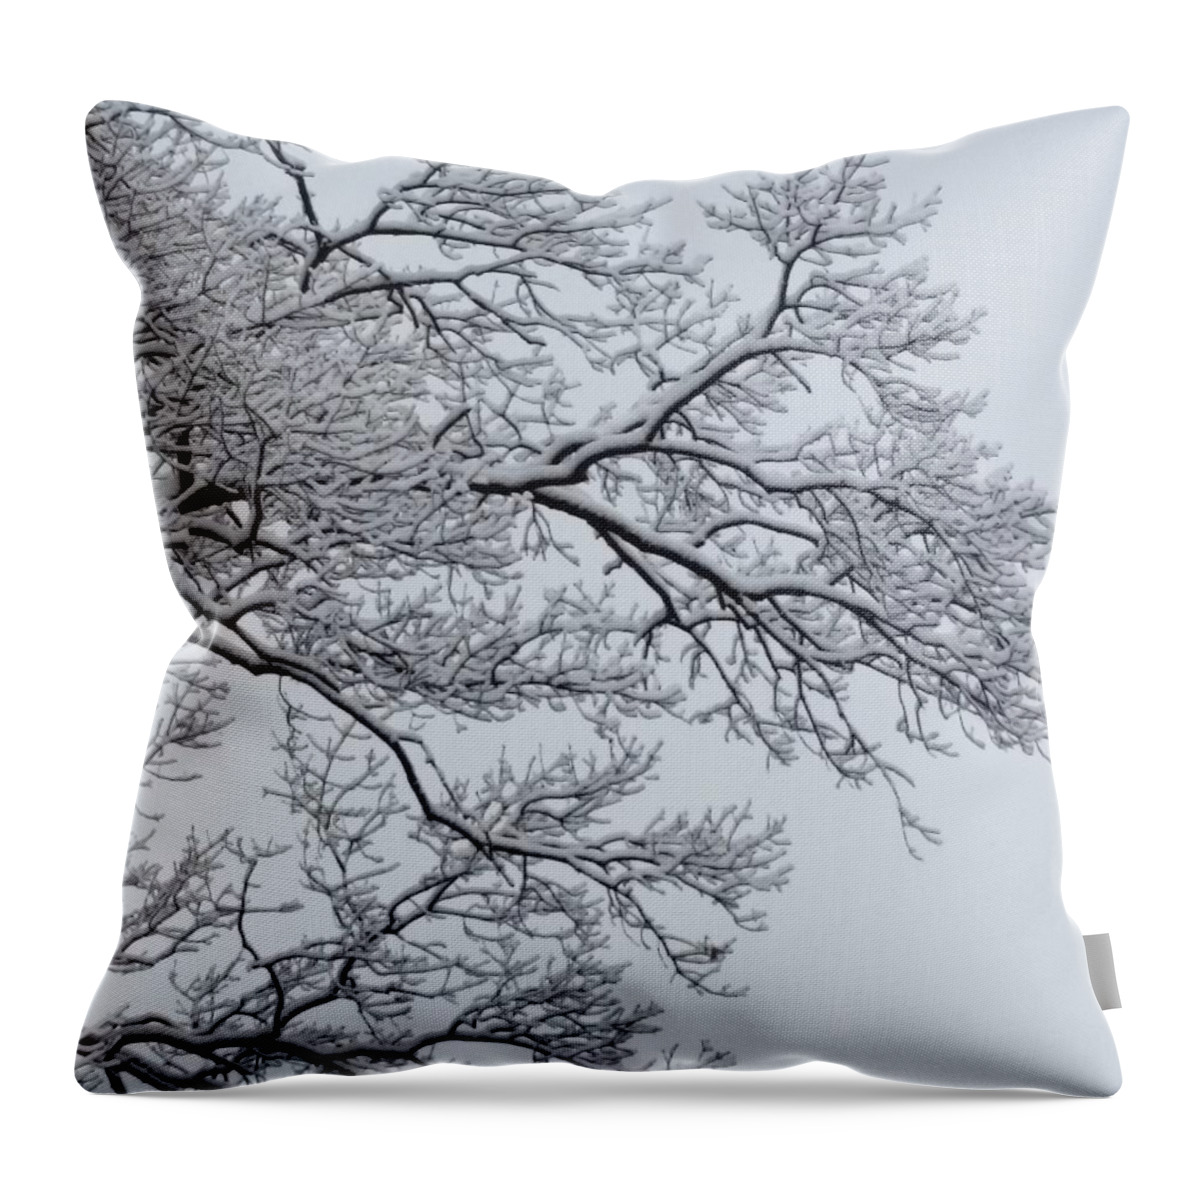 Ice Throw Pillow featuring the photograph Icey Winter Branch by Vic Ritchey